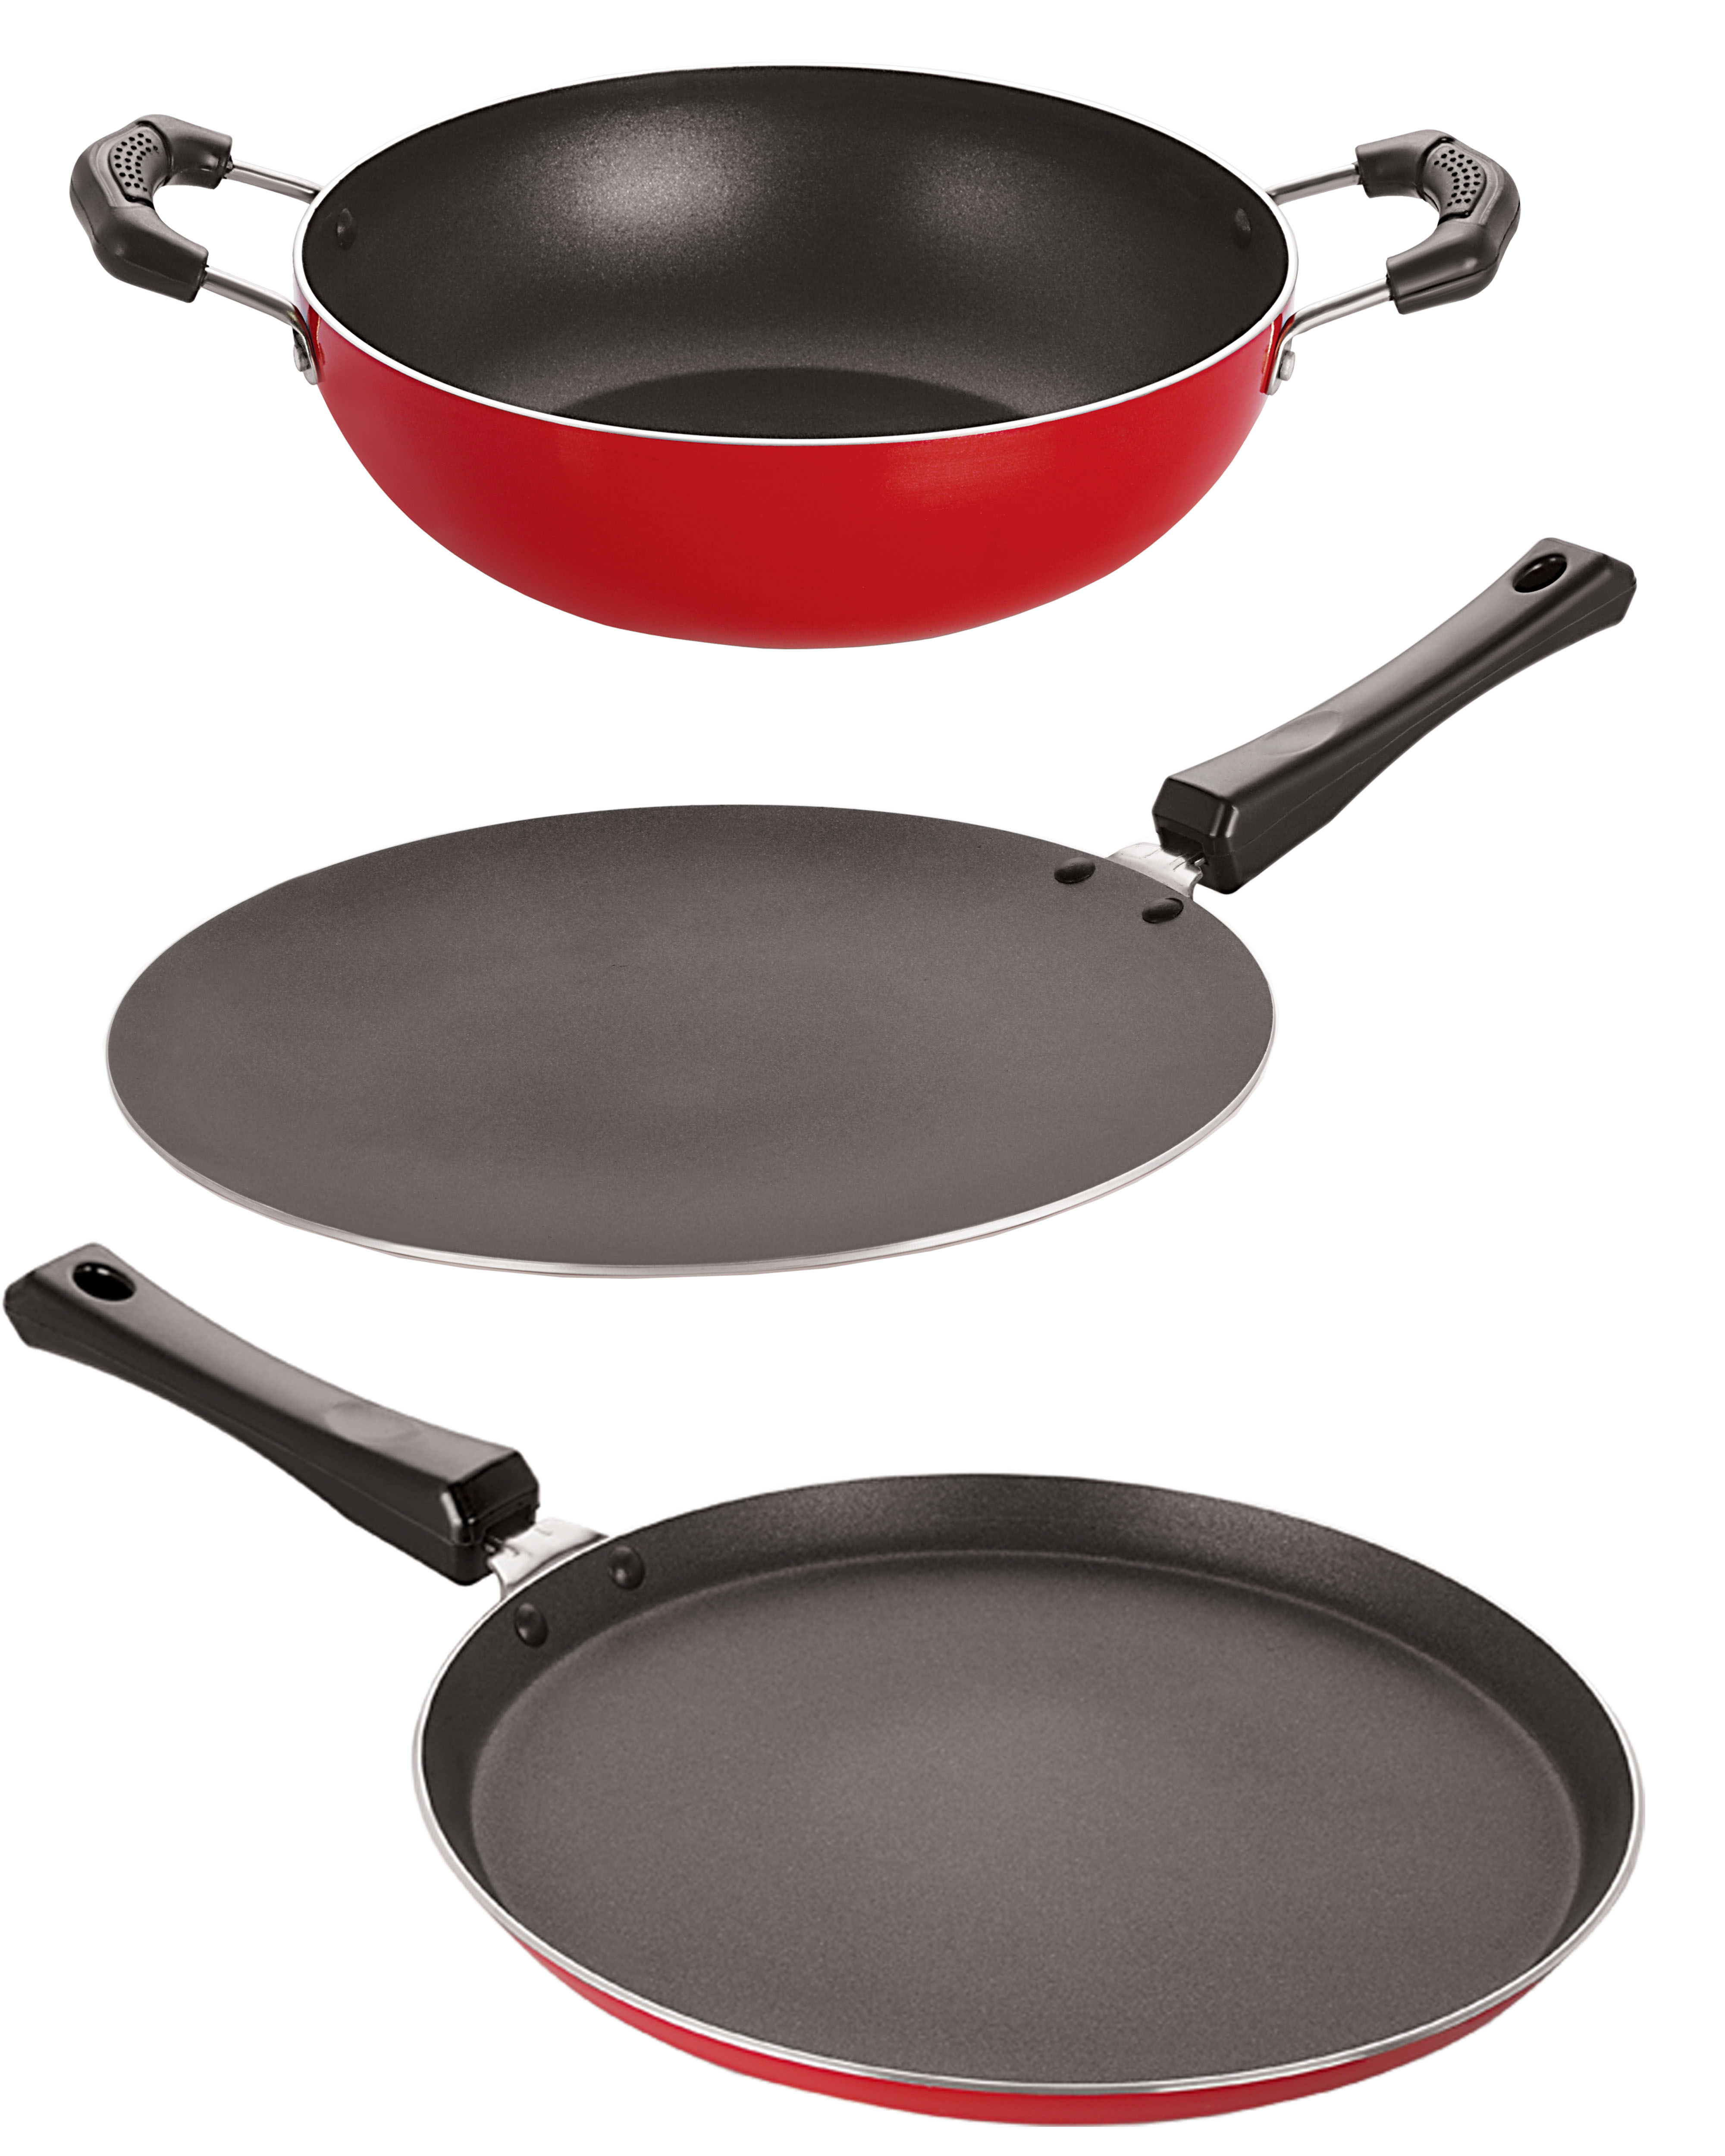 Nirlon Non Toxic Oil Free Nonstick Cookware Essential Gift Set of 3 Pcss with Bakelite Handle